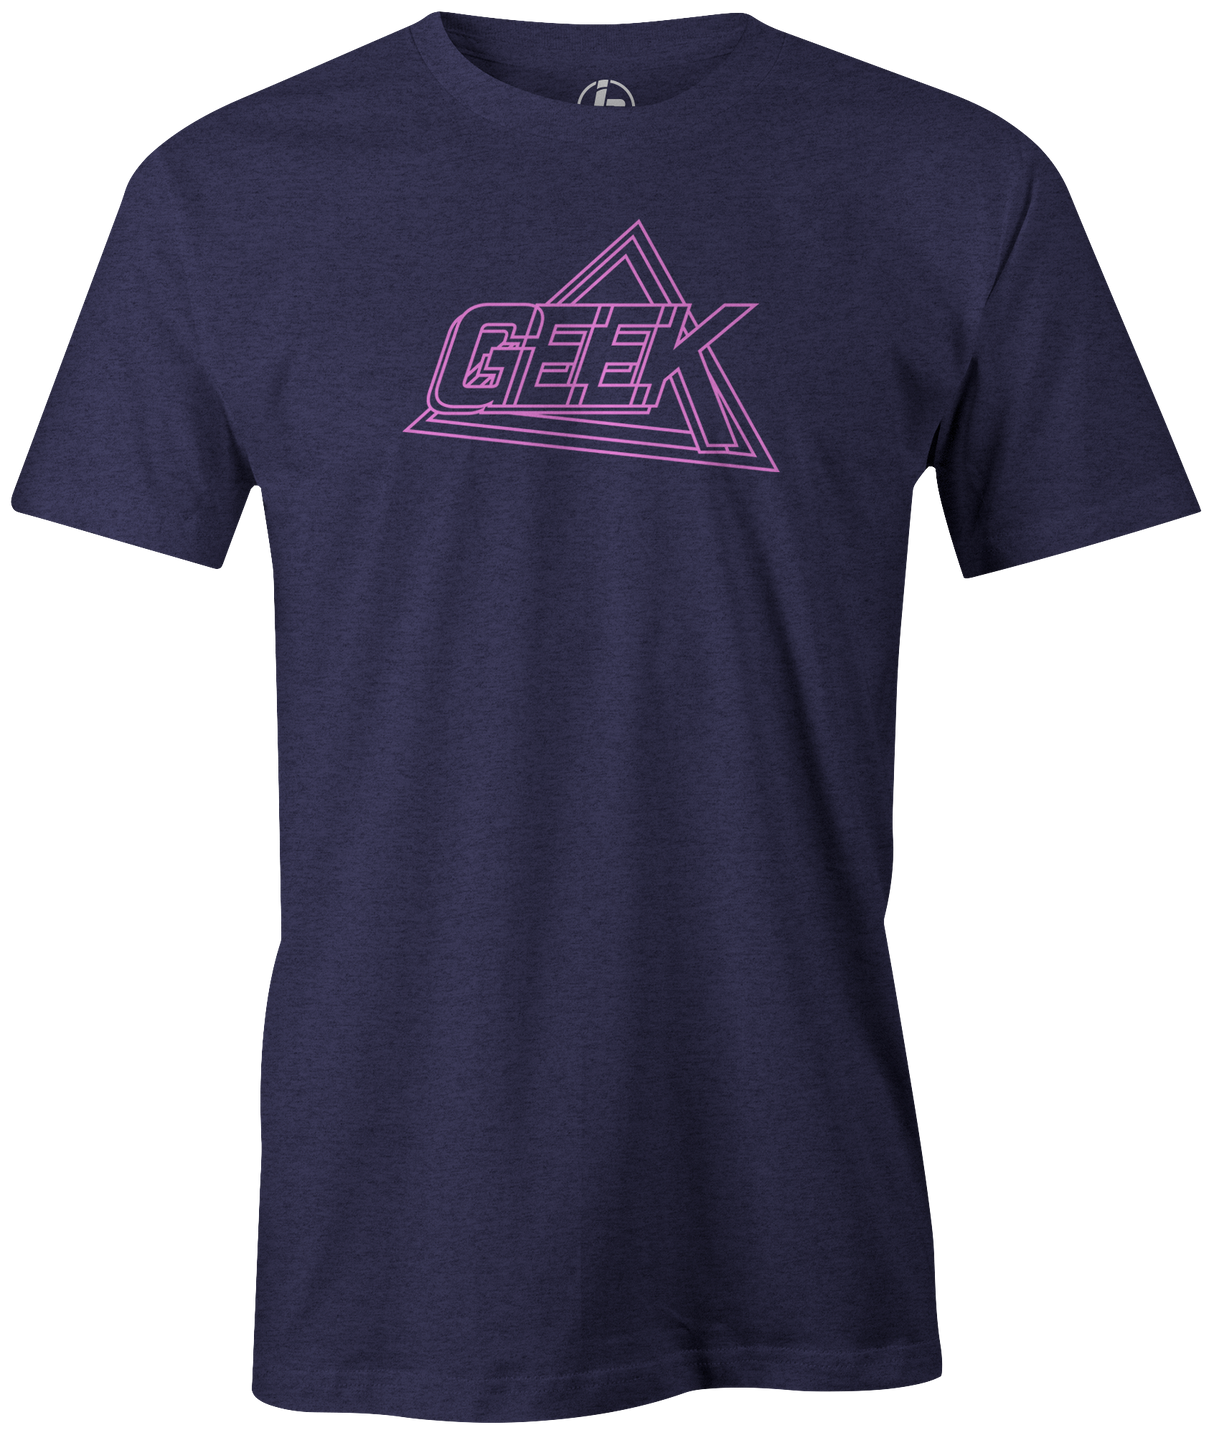 Geek by Swag Bowling. Swag Bowling Classic Logo T-shirt. This shirt is perfect for bowling practice, leagues or weekend tournaments. Men's T-Shirt, bowling ball, tee, tee shirt, tee-shirt, t shirt, t-shirt, tees, league, tournament shirt, PBA, PWBA, USBC. f